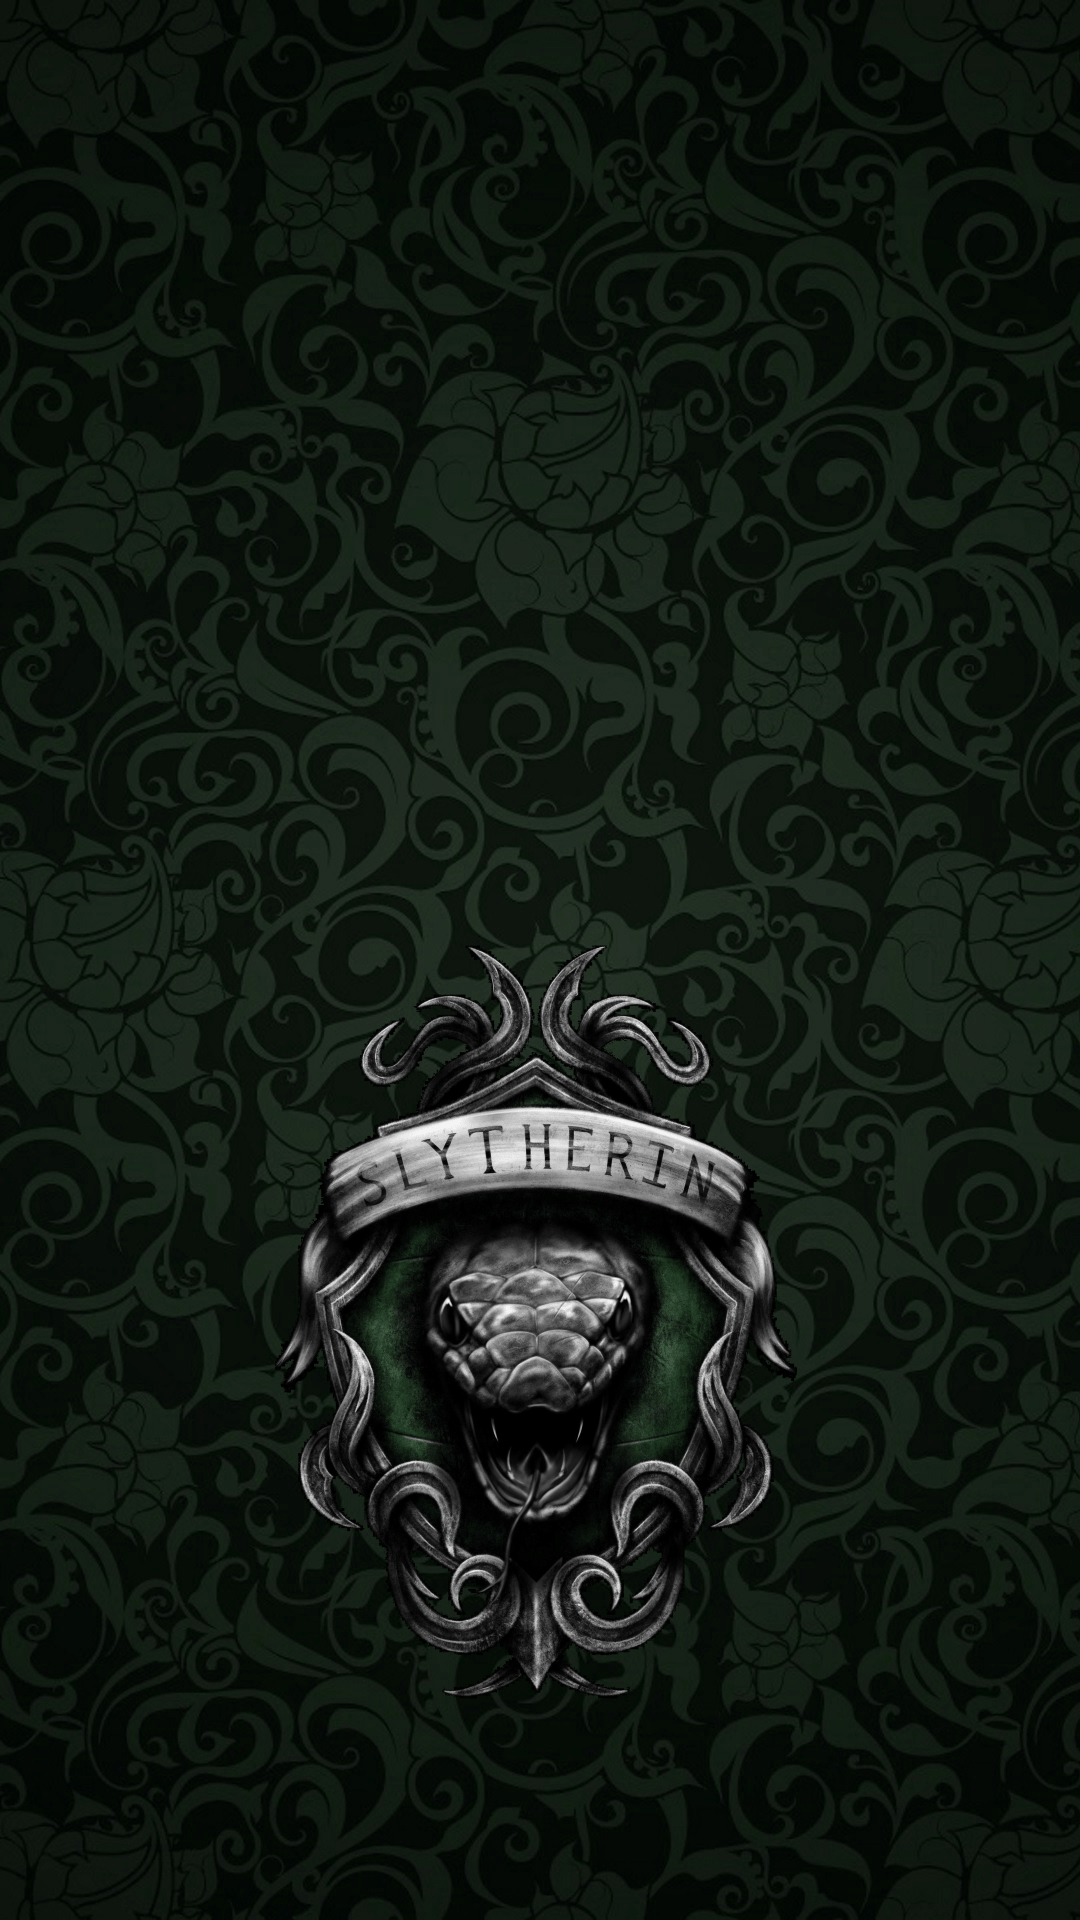 Download this cool Harry Potter wallpaper for your phone. - Slytherin